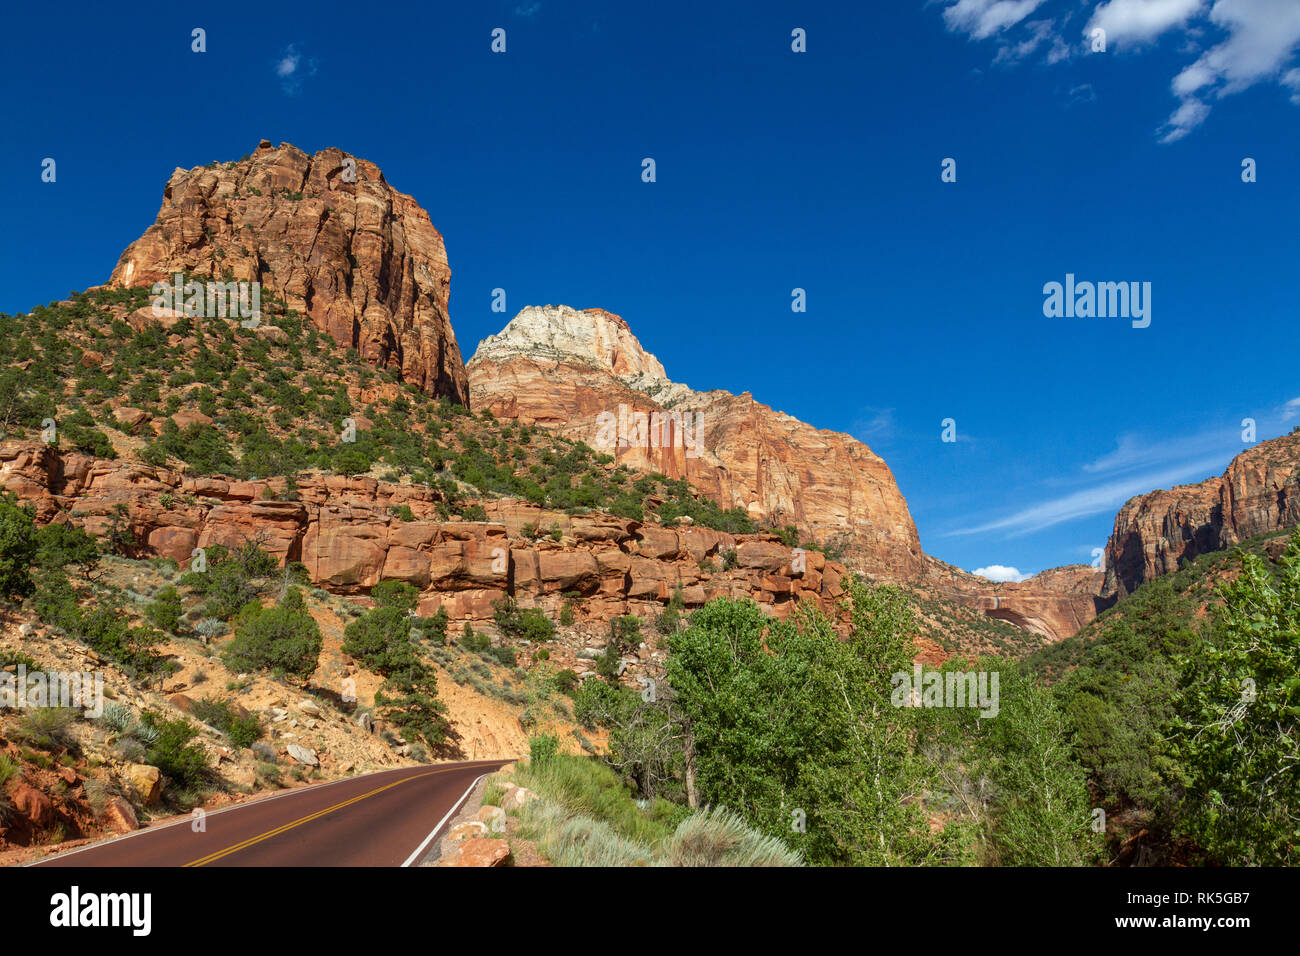 View towards the East Temple along Route 9 heading east away from Zion Canyon in the Zion National Park, Utah, United States. Stock Photo